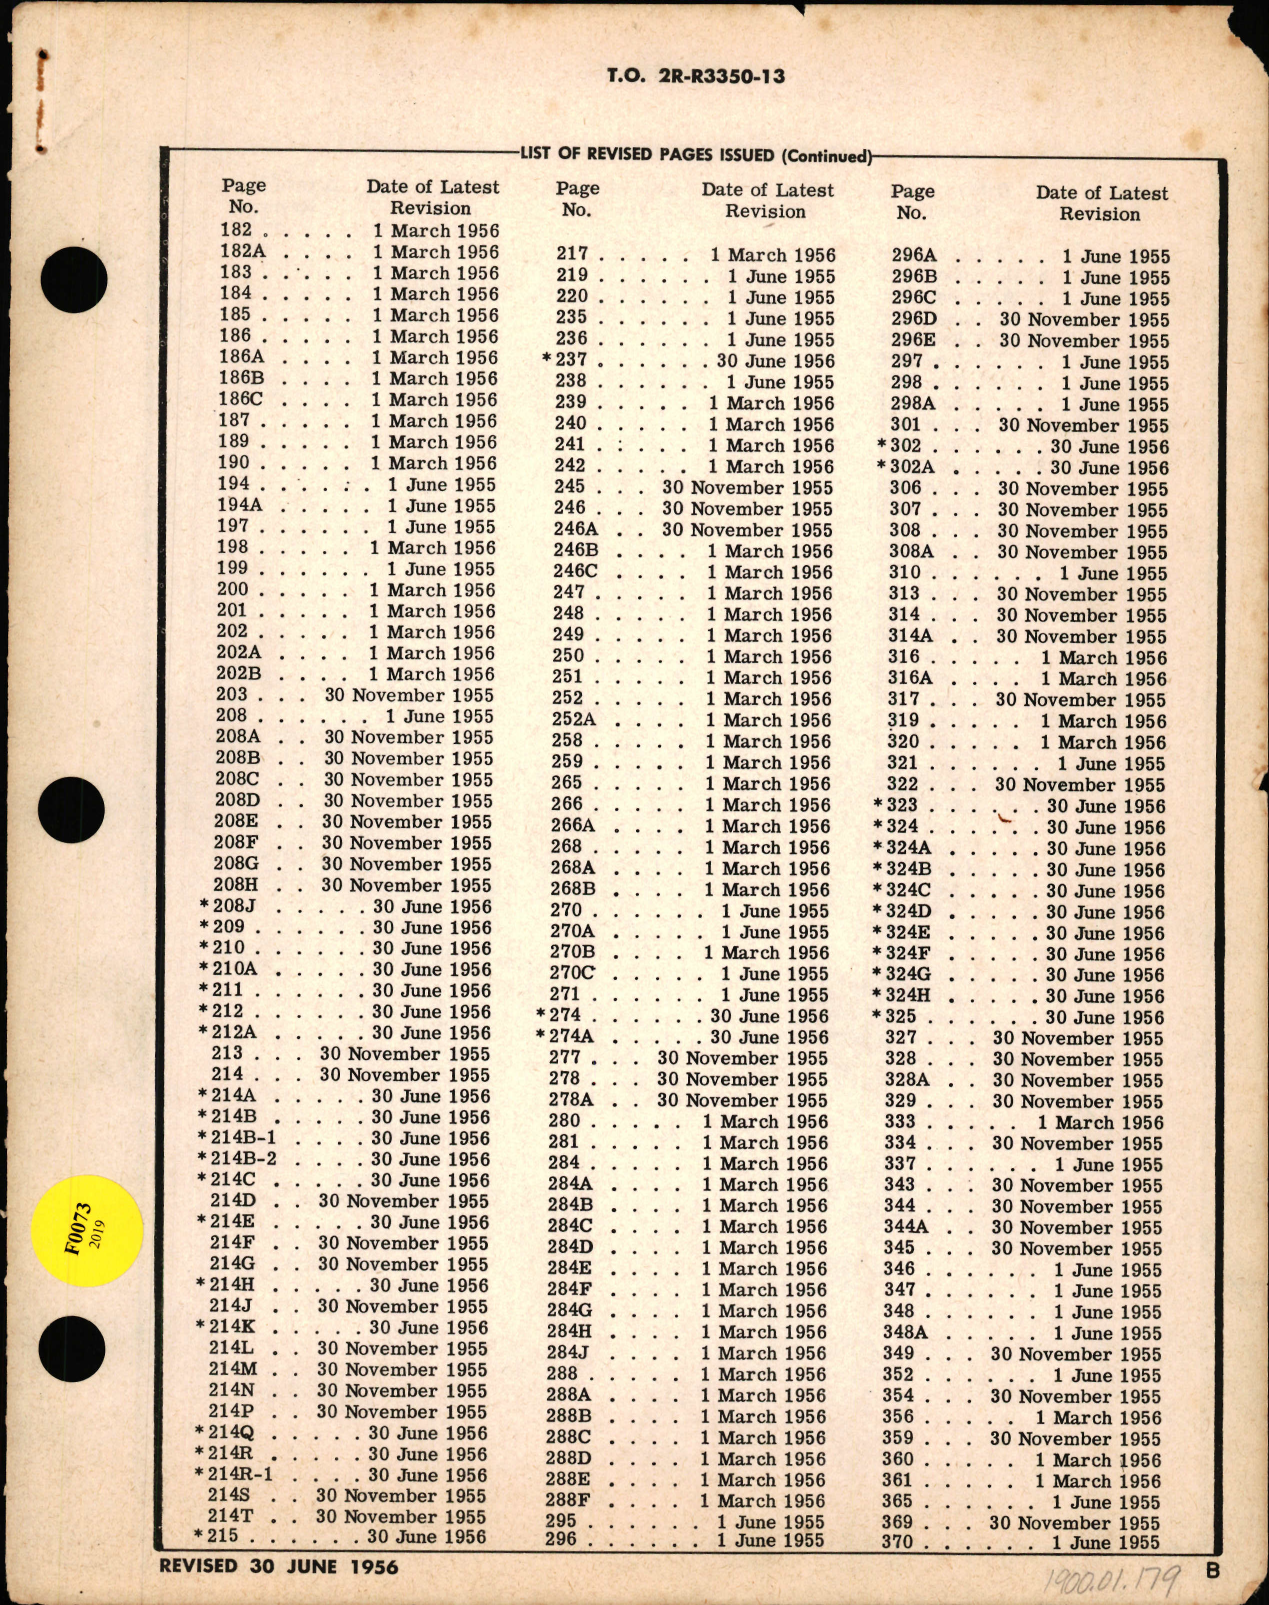 Sample page 1 from AirCorps Library document: Unidentified Manual for R-3350